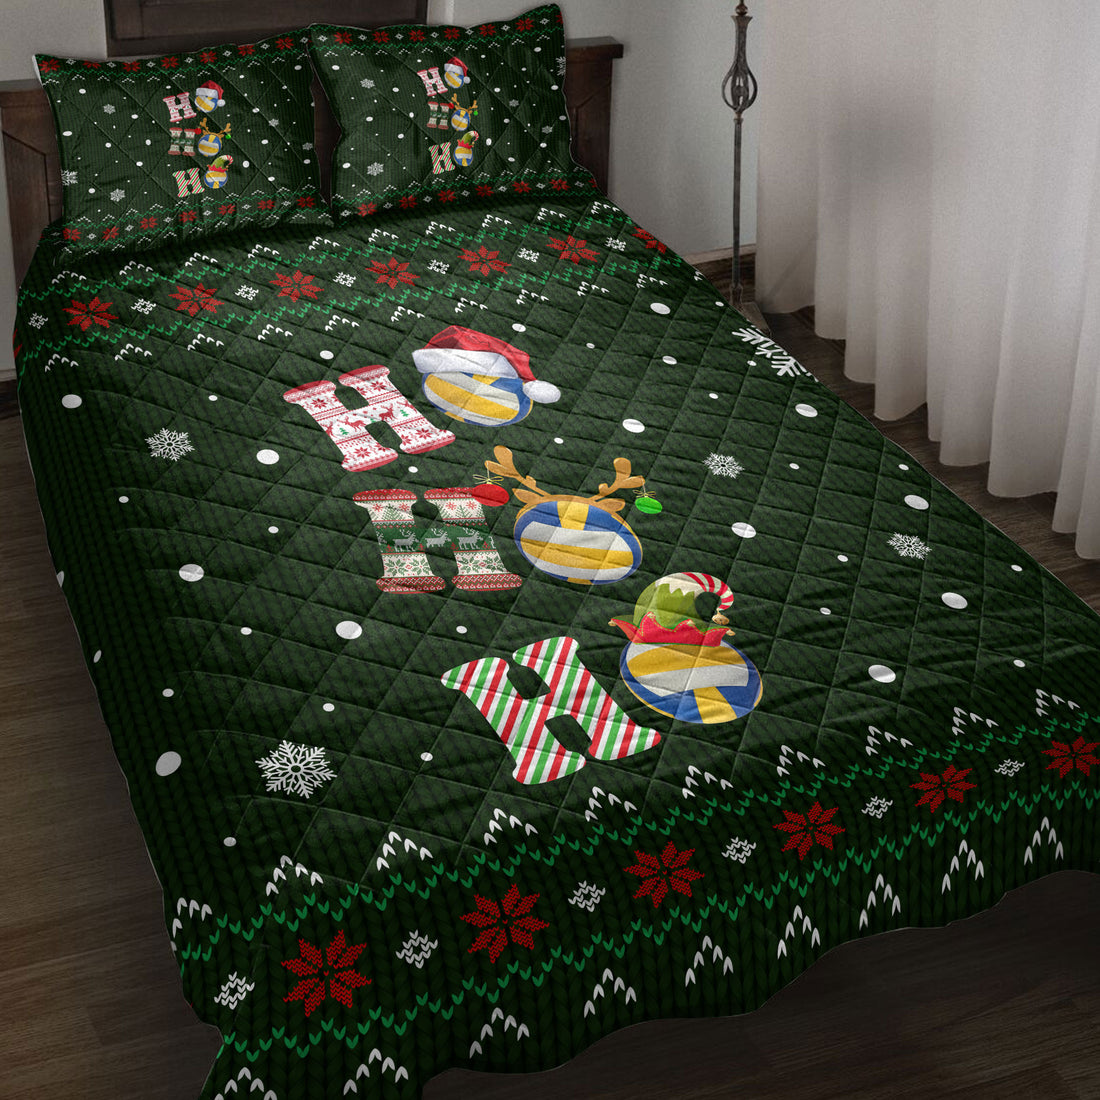 Ohaprints-Quilt-Bed-Set-Pillowcase-Ho-Ho-Ho-Volleyball-Santa-Hat-Christmas-Snowflake-Ugly-Pattern-Blanket-Bedspread-Bedding-3810-Throw (55'' x 60'')